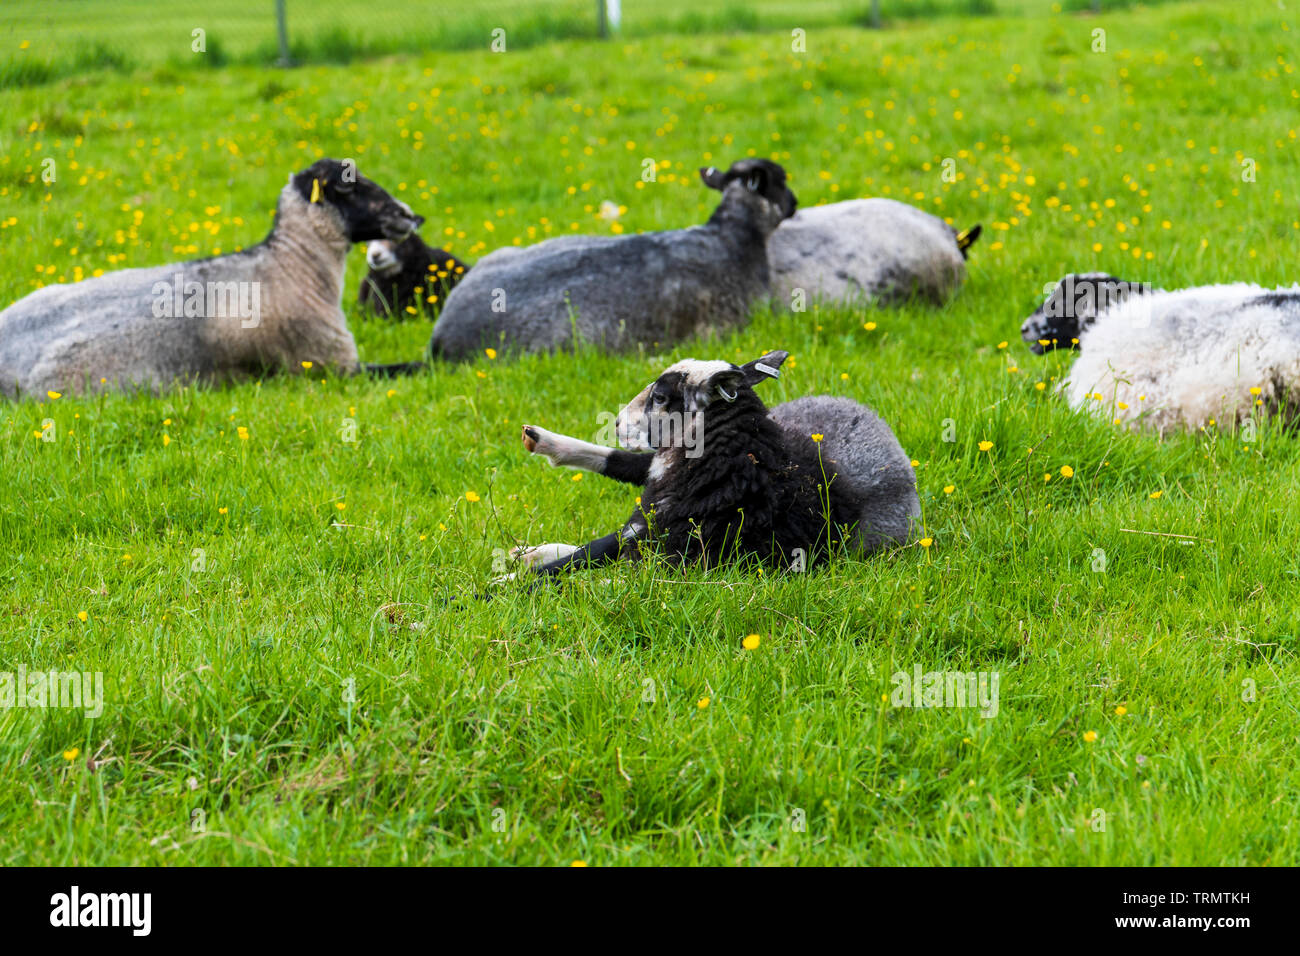 A black sheep lies down in a field in Sweden Stock Photo